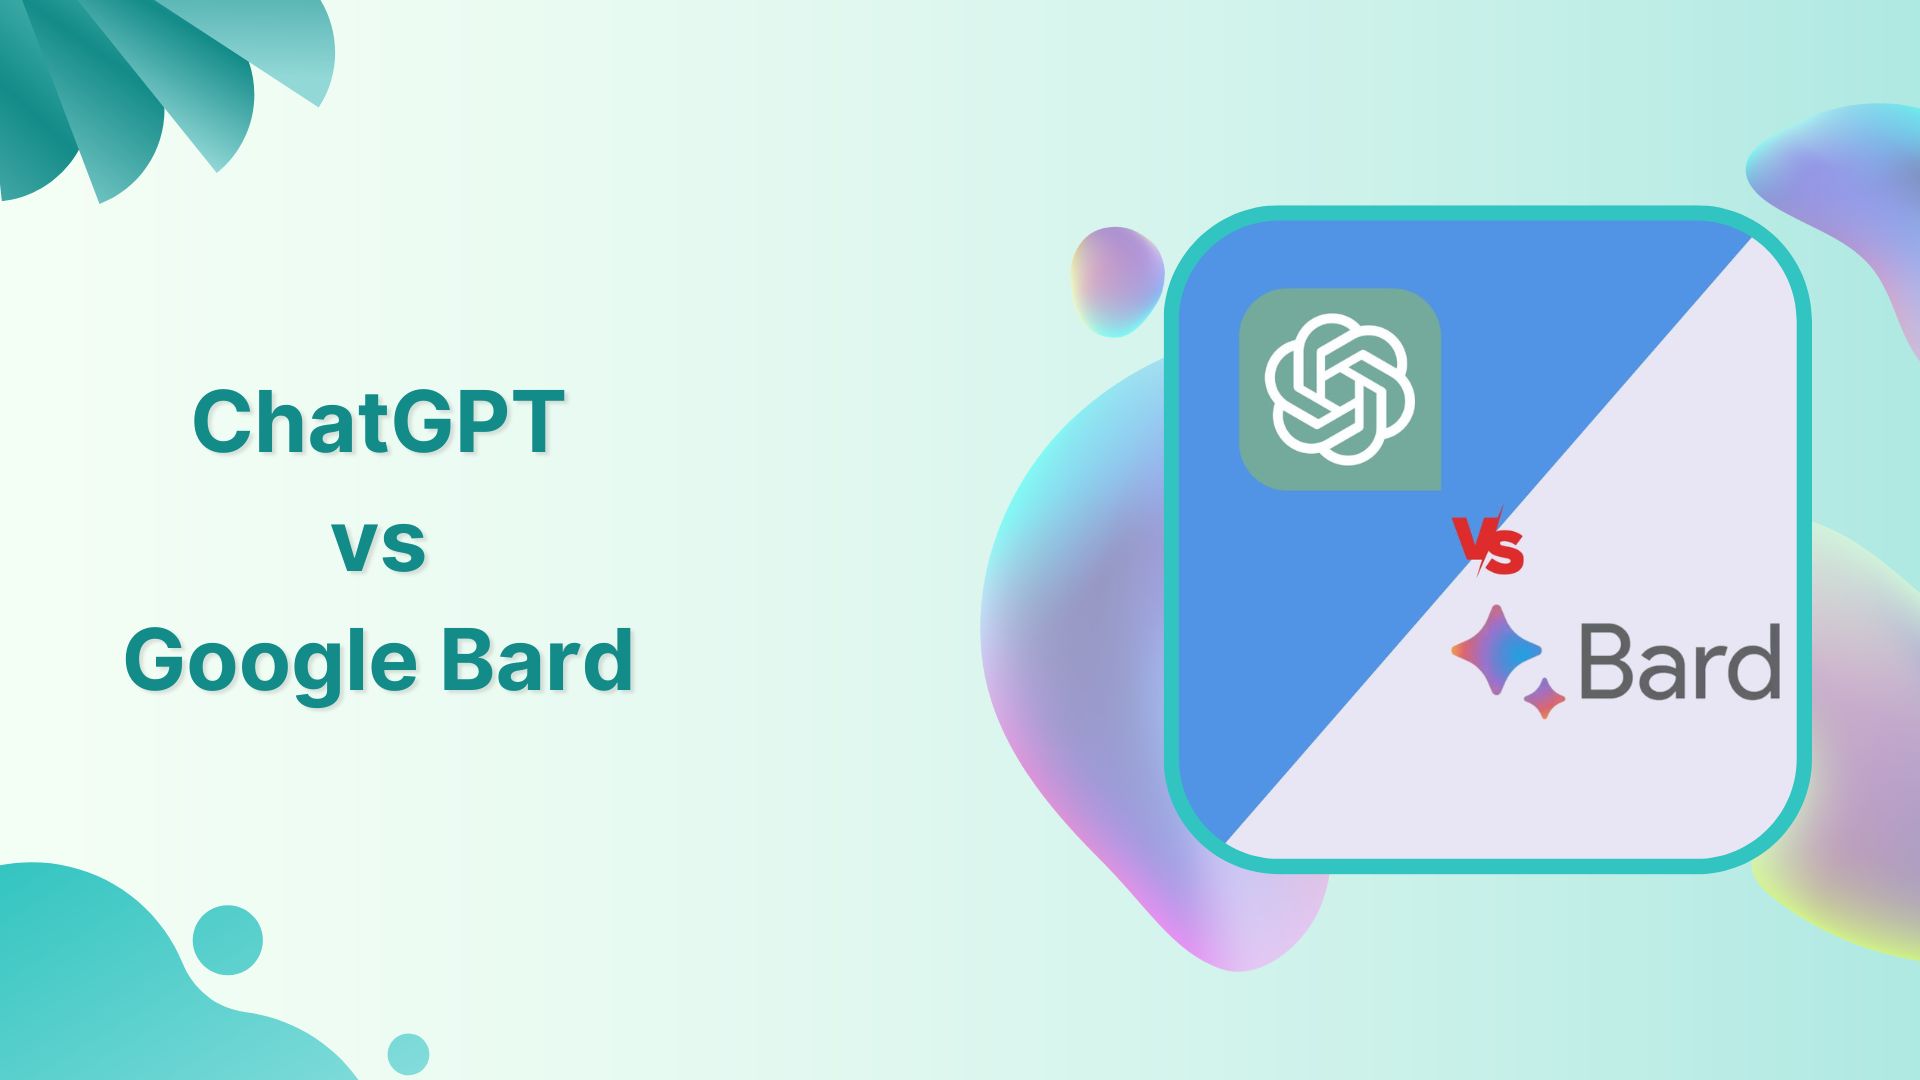 ChatGPT vs Google Bard: Which Is Better?